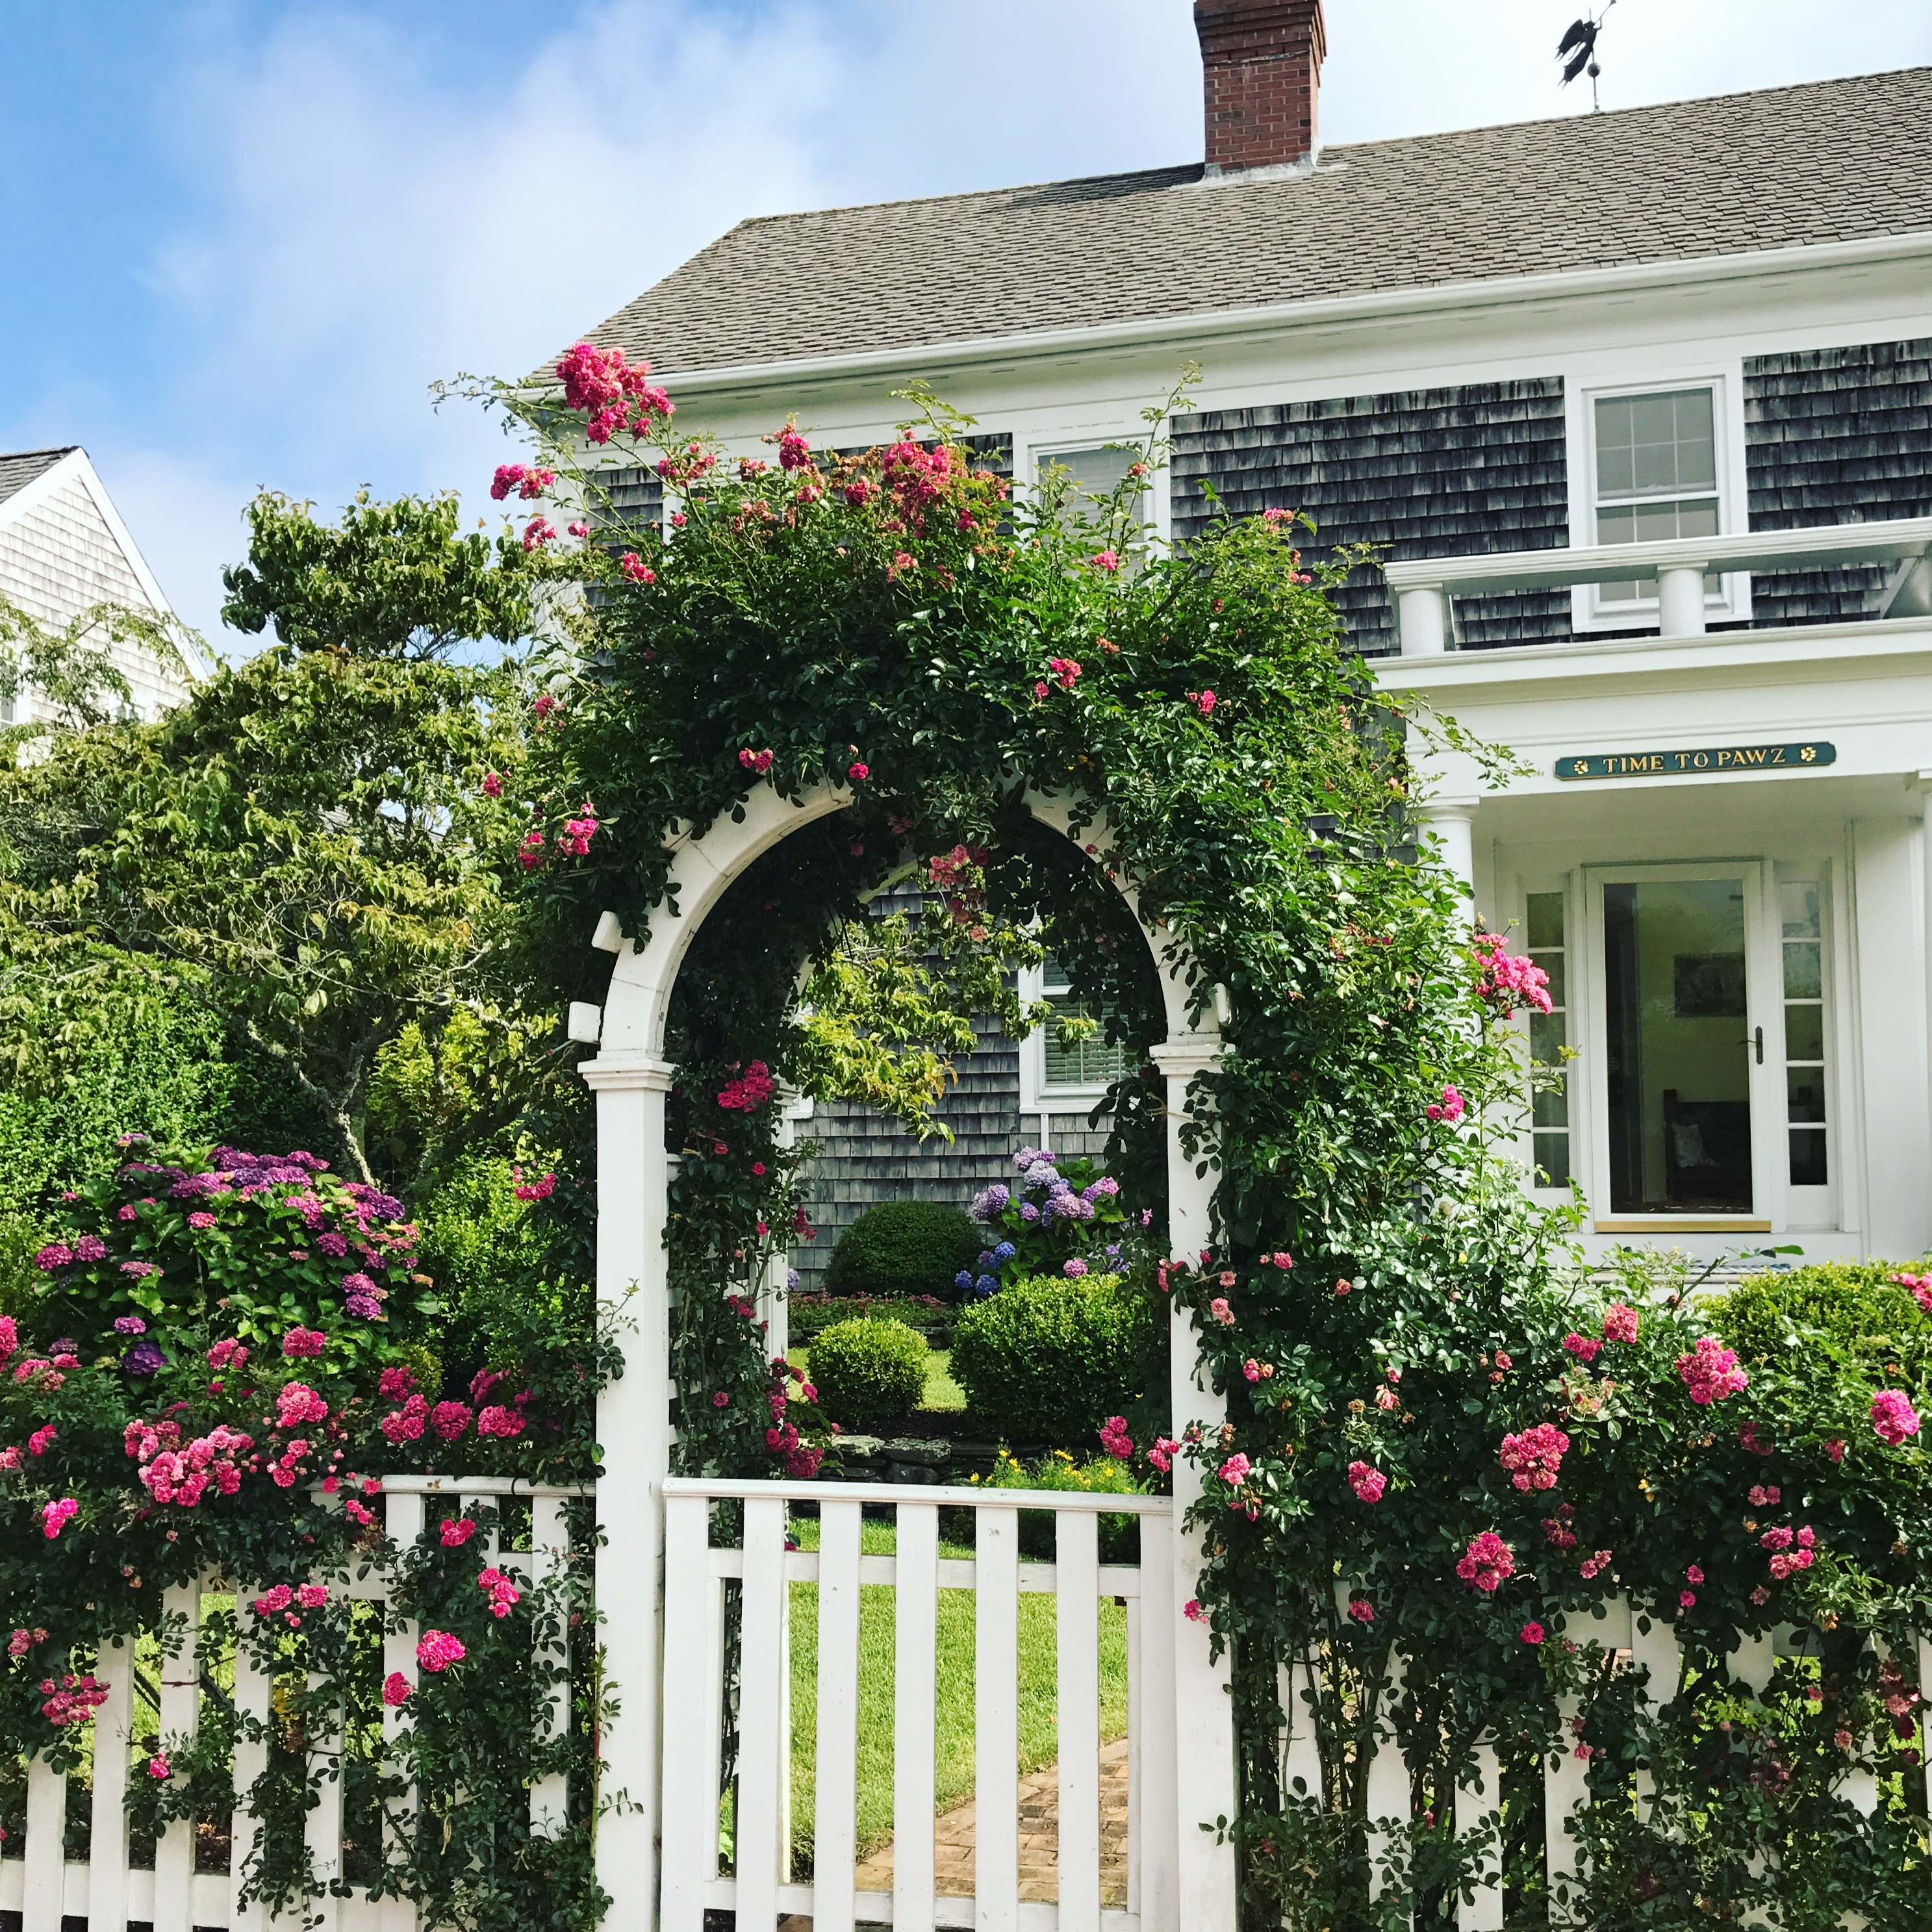 Nantucket home photo by christina dandar for The Potted Boxwood 31